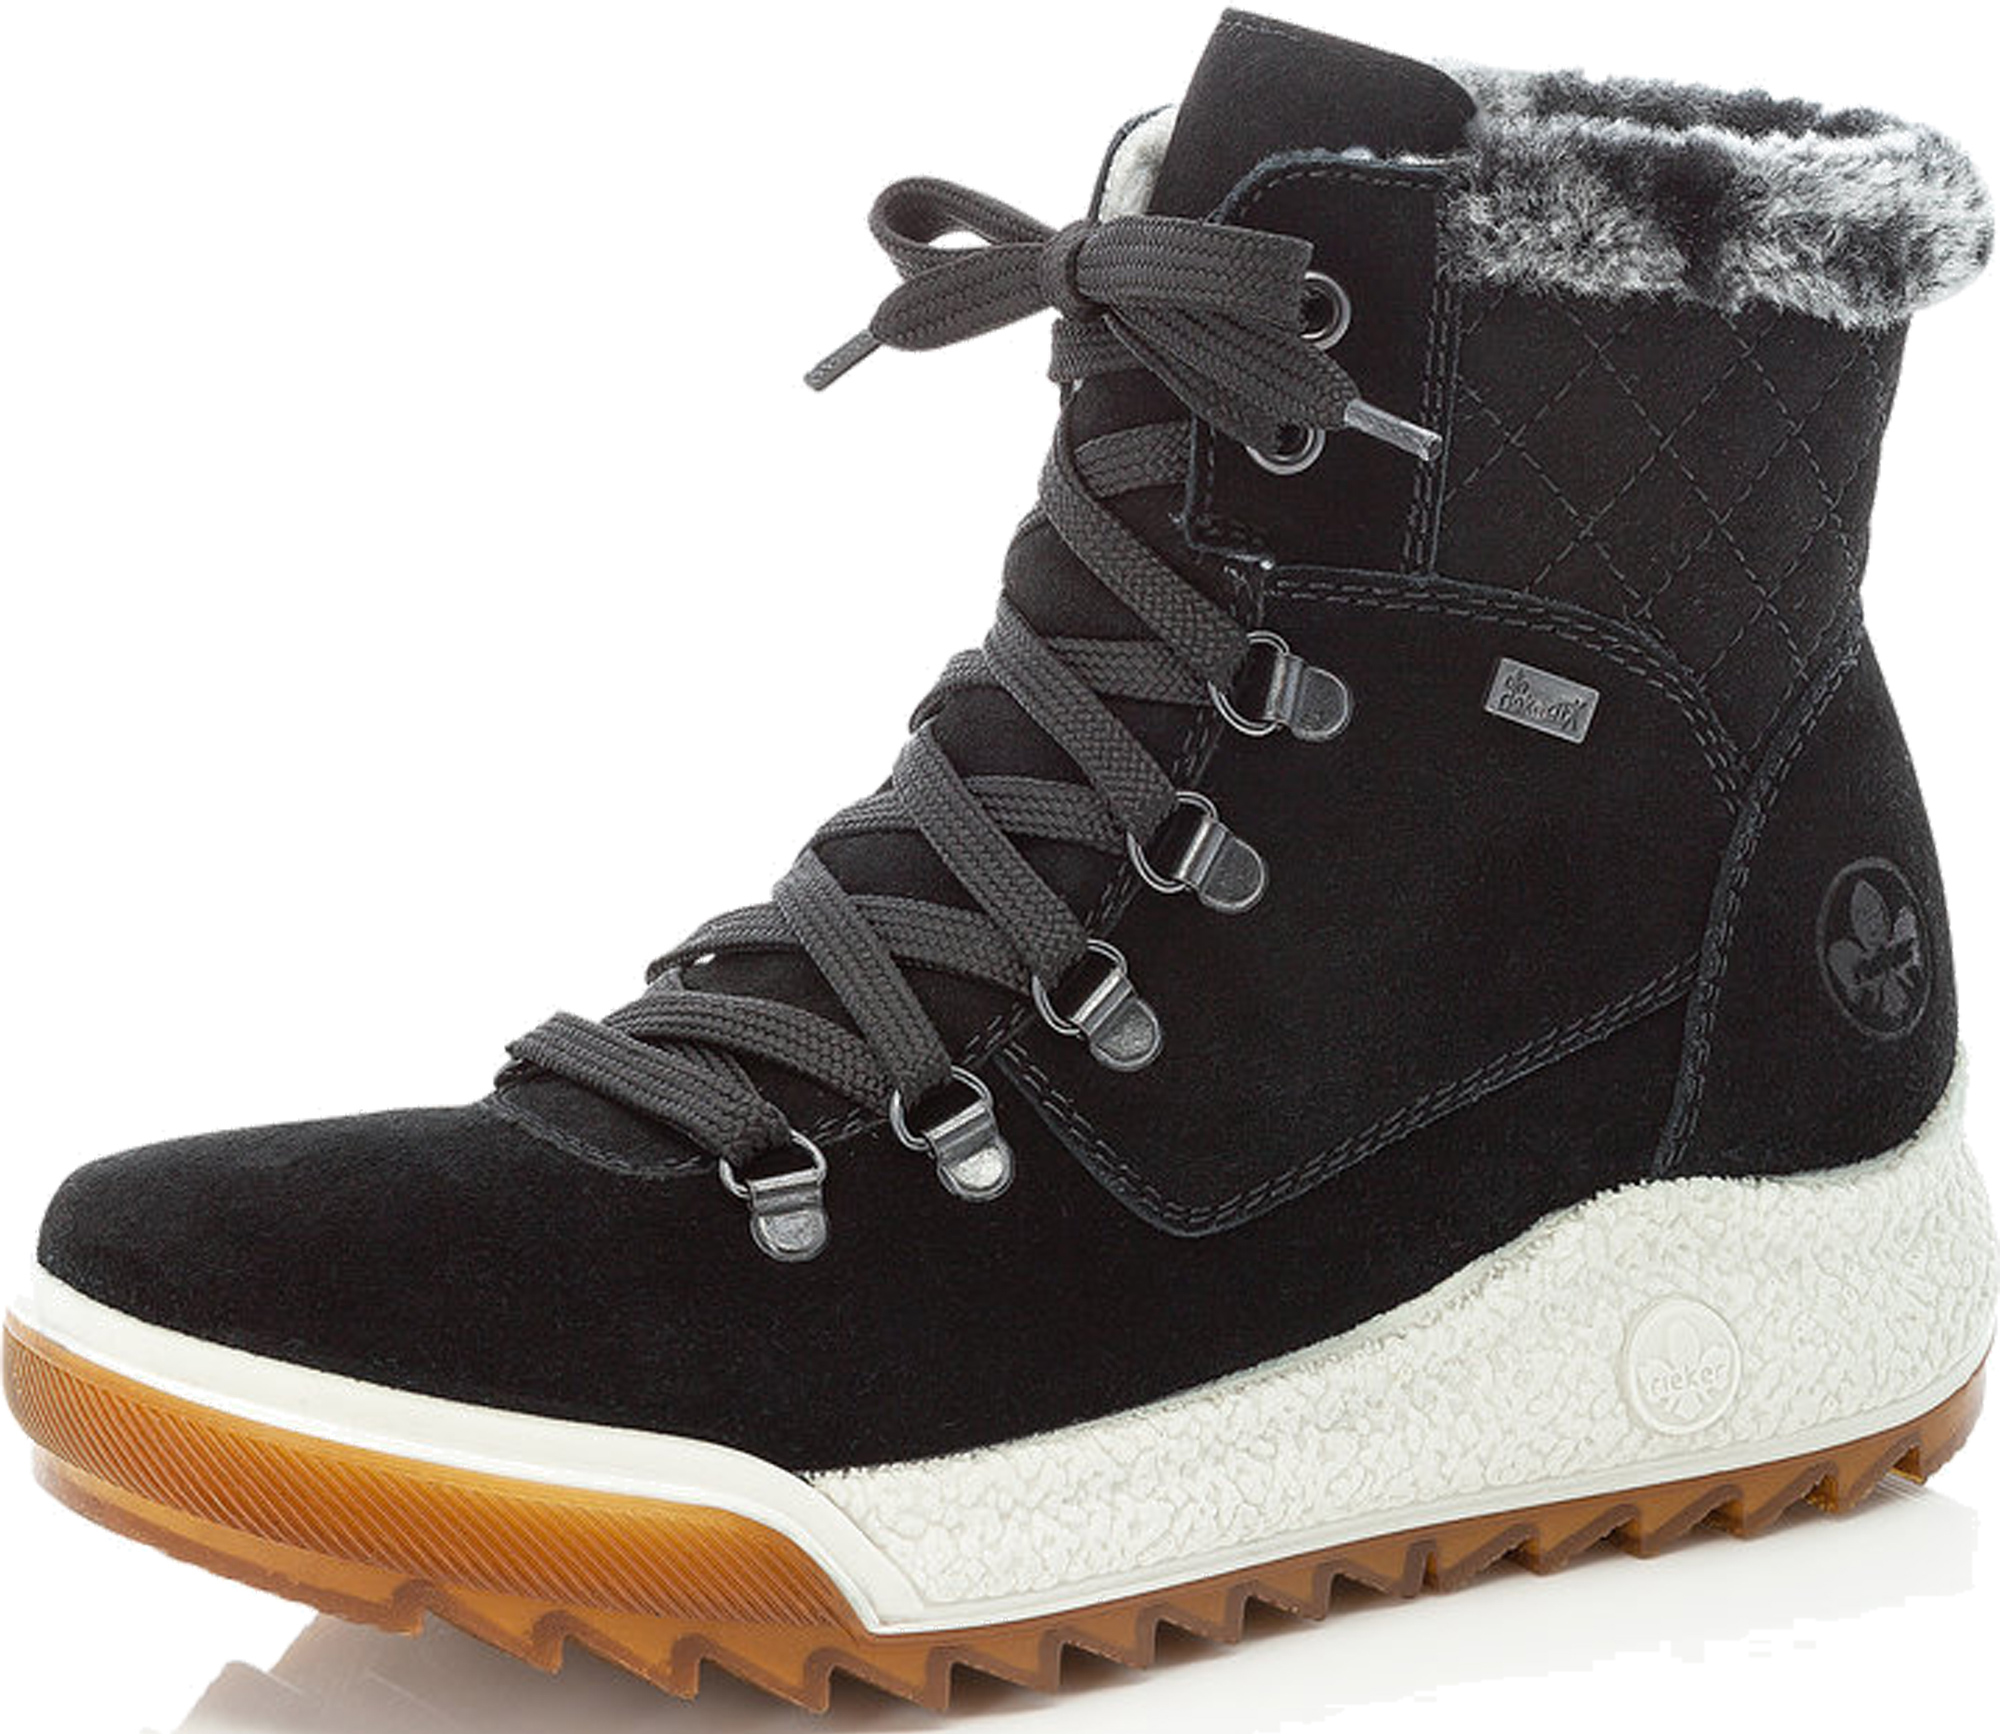 Rieker Black Saw Tooth Sole D Ring Suede Hiker size 8